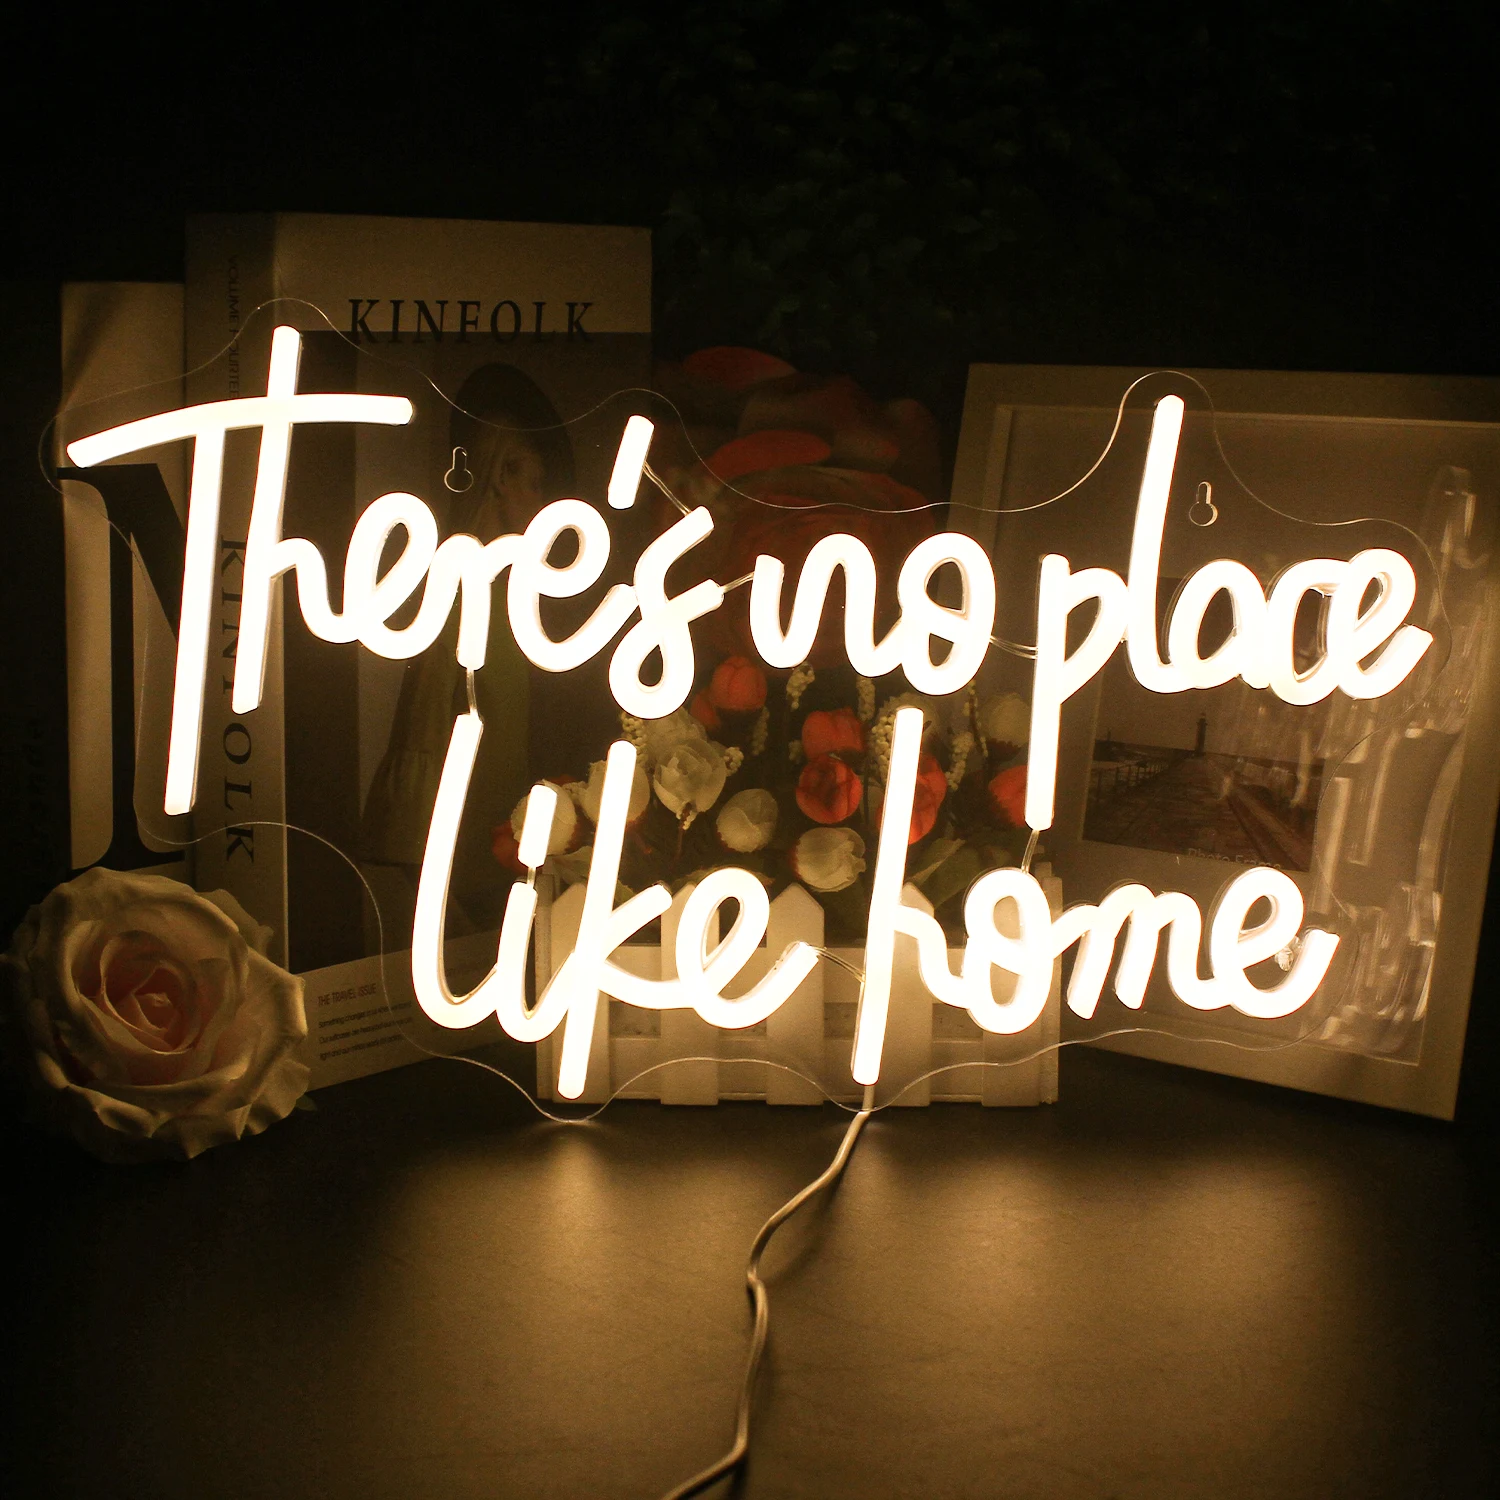 

There‘s No Place Like Home Neon Signs Warm White Led Neon Light for Wall Decor for Wedding Home Party Kid Room USB Powered Led